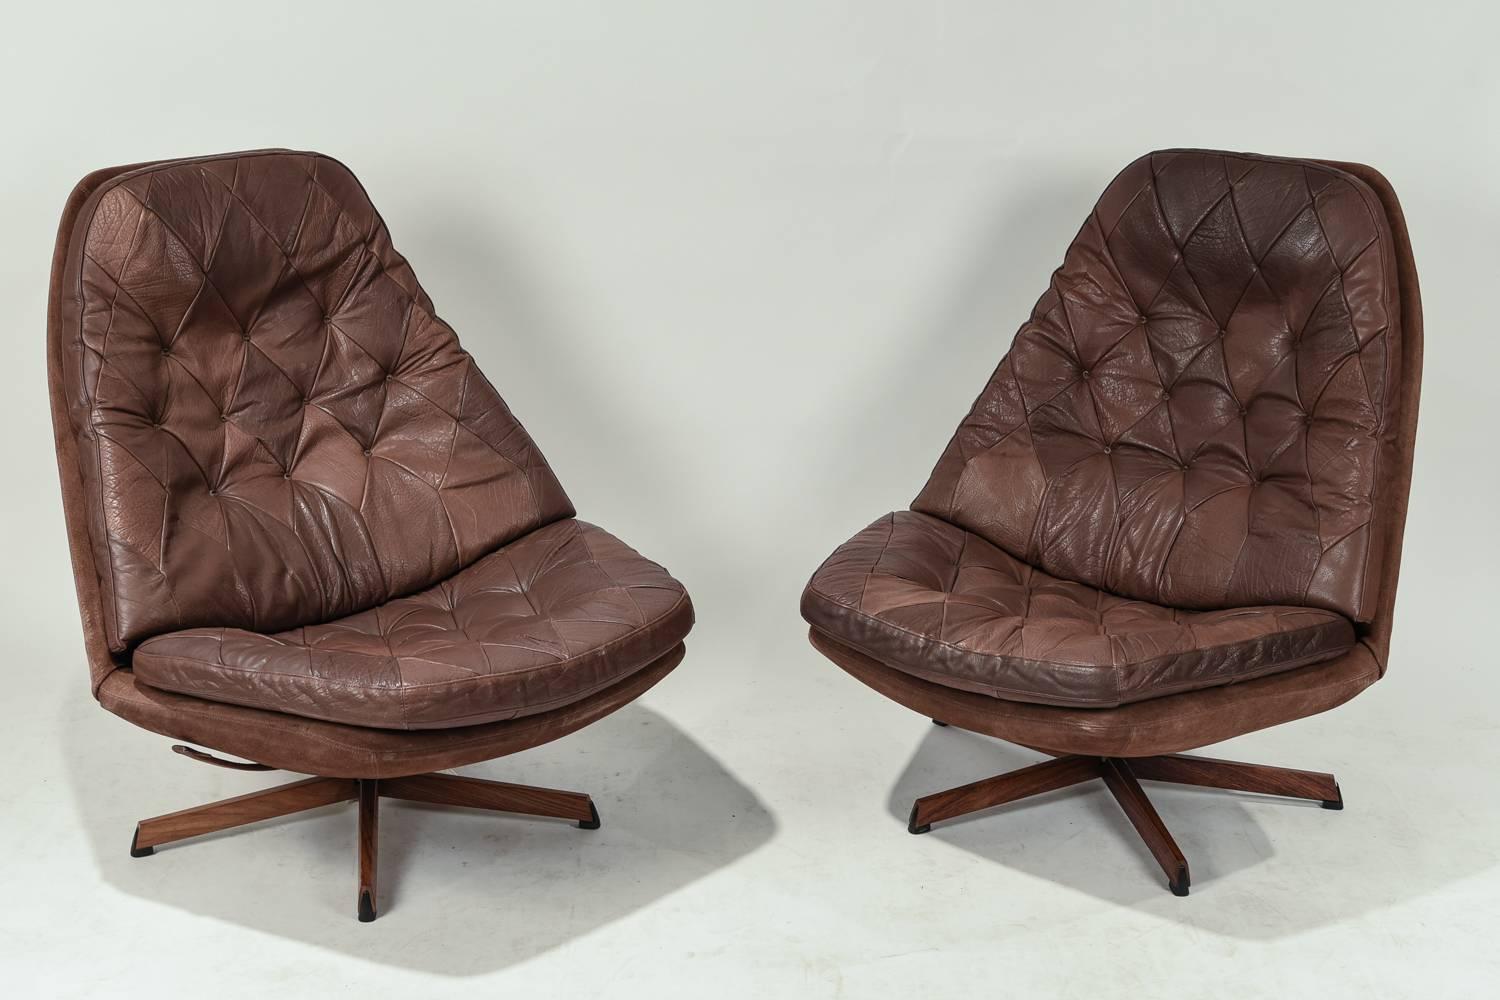 This pair of Model MS68 swivel high back chairs was designed by Madsen and Schubel. Upholstered in supple leather.